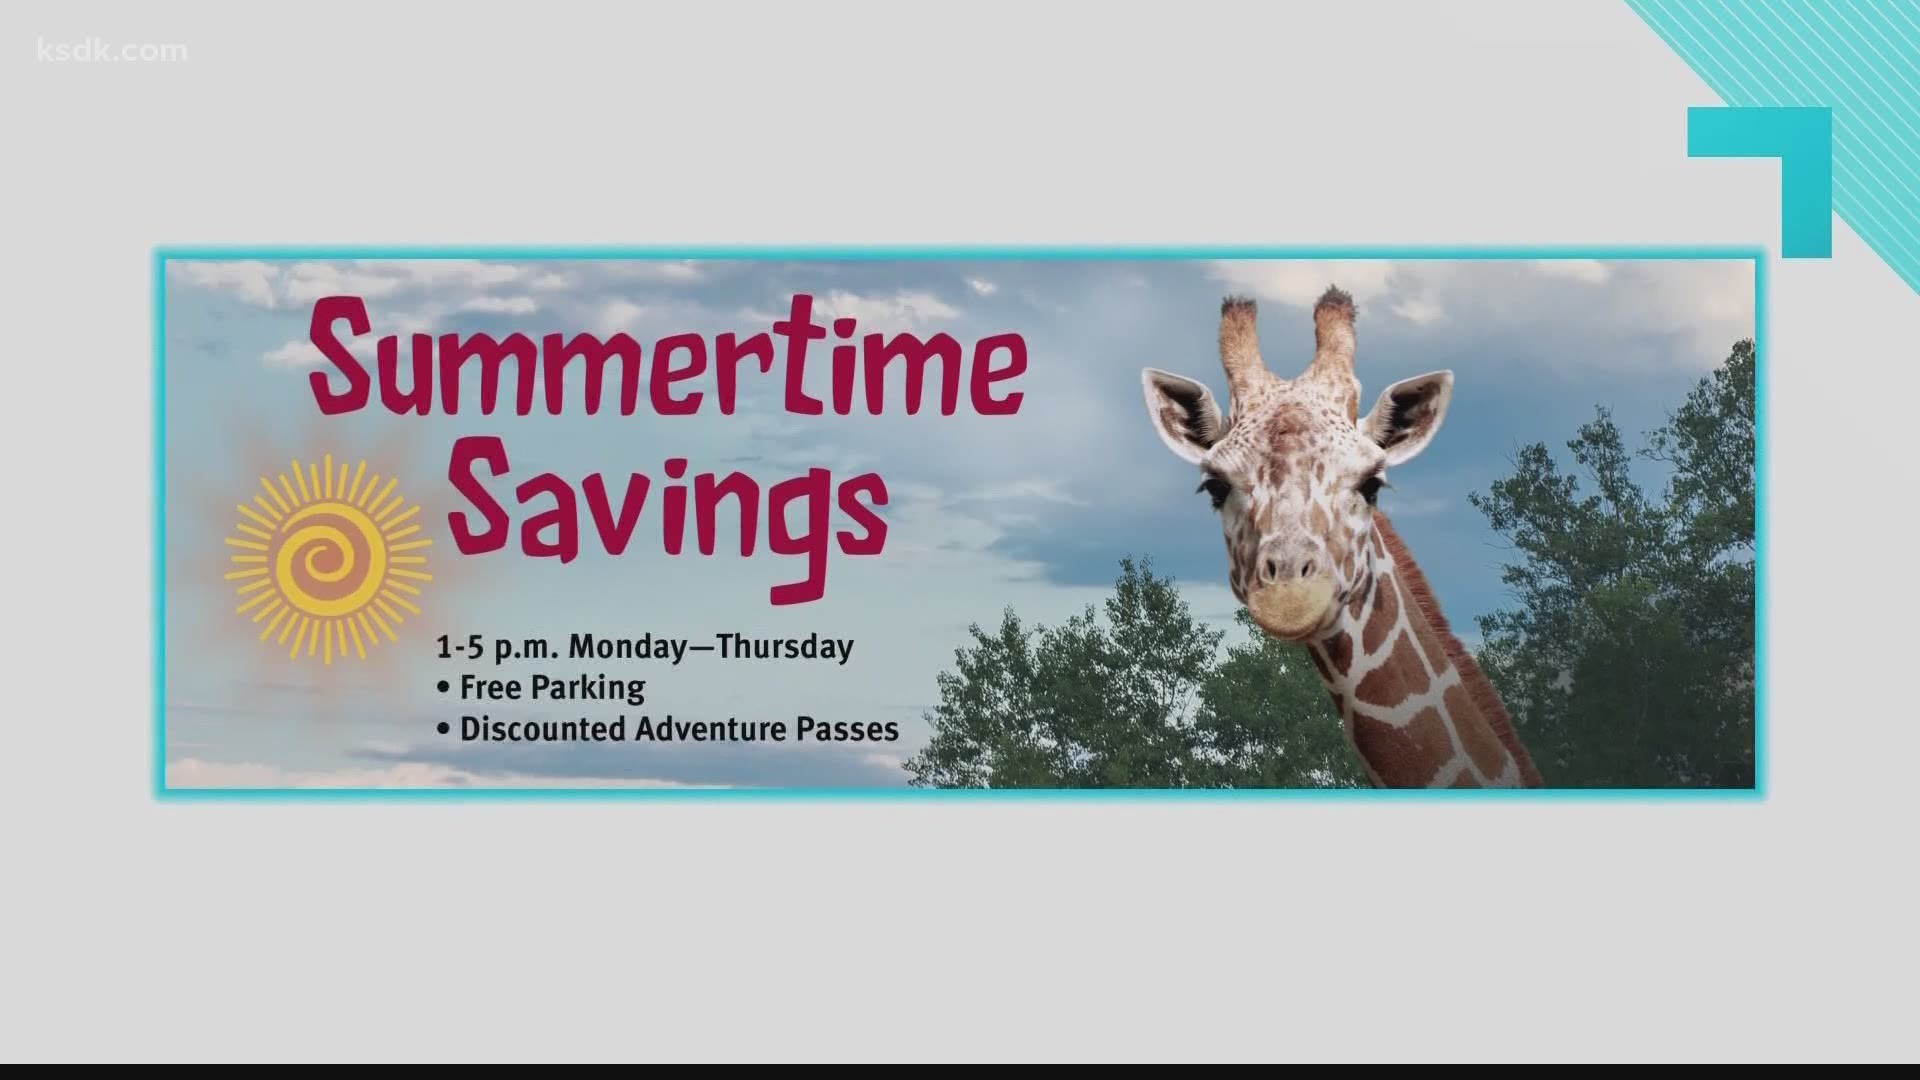 You can get free parking and a discount on a Zoo adventure pass.